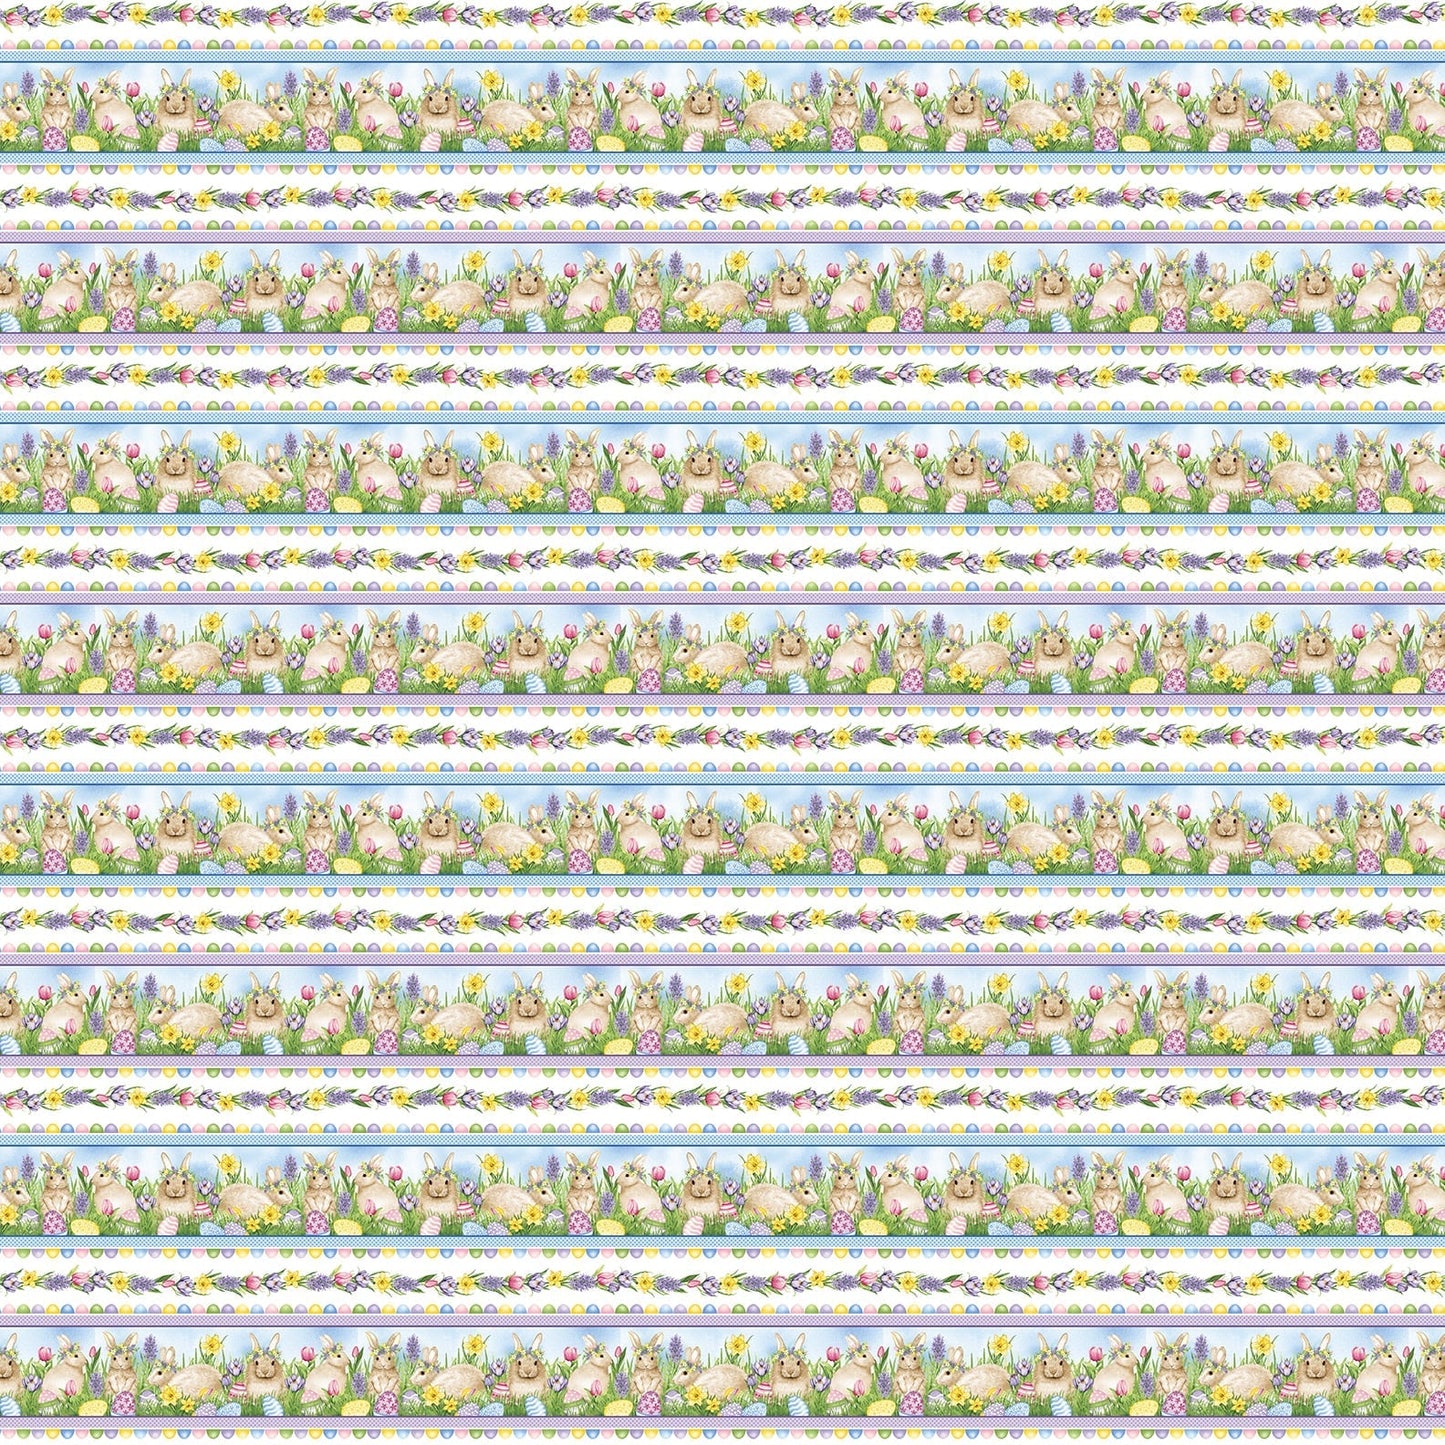 Henry Glass fabric bundle FQ Bundle (20) Hoppy Hunting FQ Bundle (20 pcs) of Easter Egg and Easter Bunny Fabric